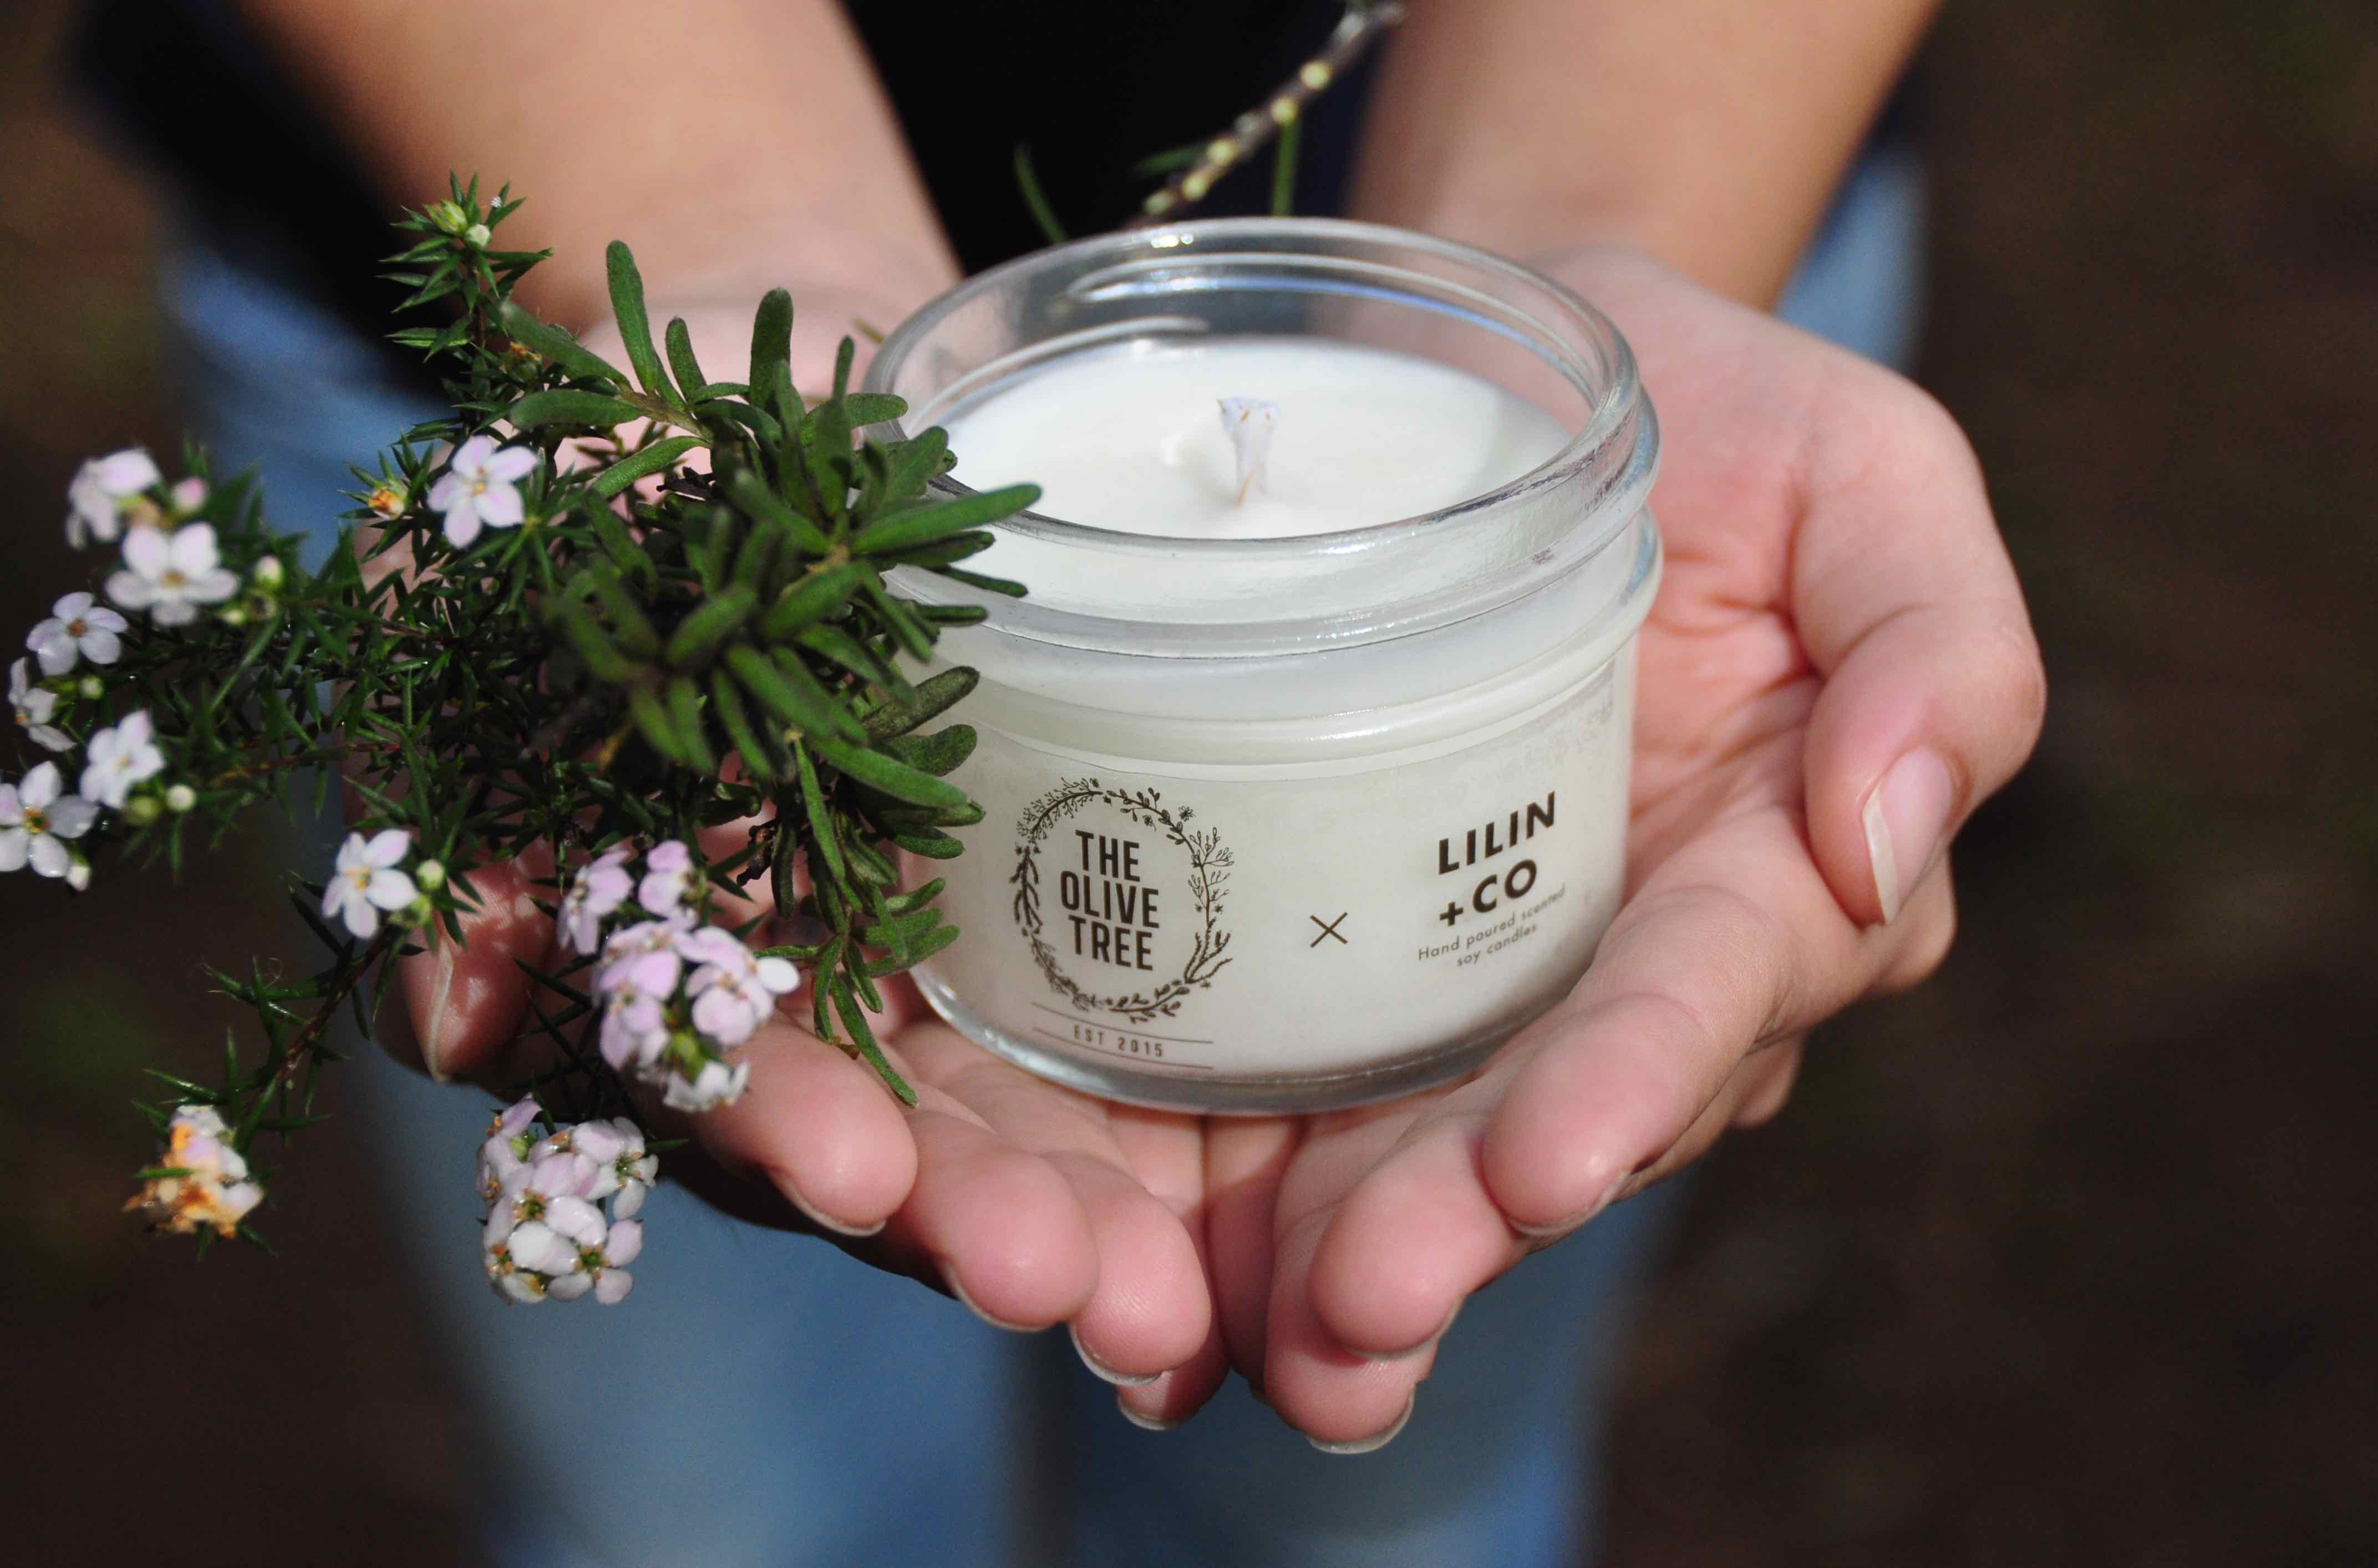 The Olive Tree x Lilin + Co Ylang Ylang Geranium Essential Oil Scented Premium Soy Wax Candle